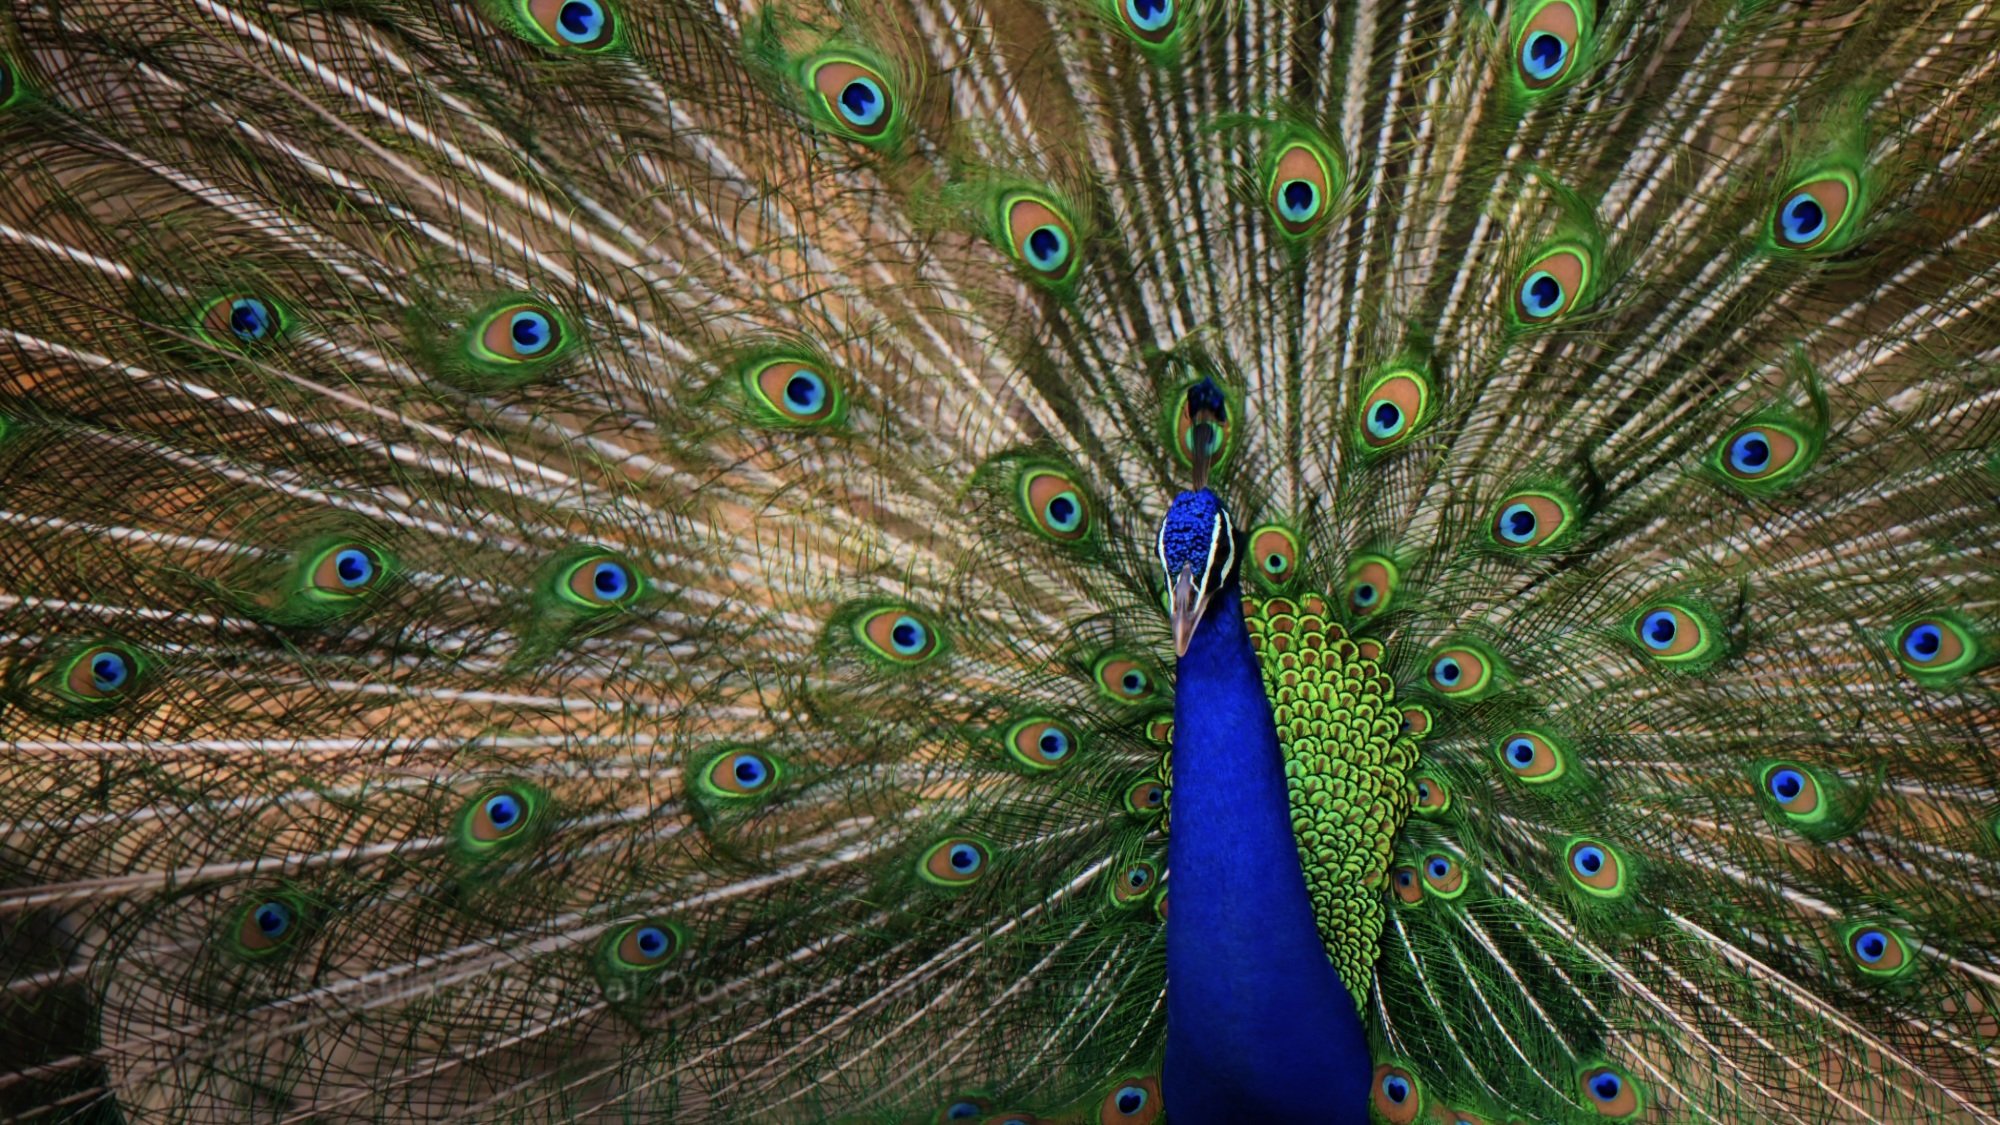 A peacock with its tail completely unfurled and raised behind it.